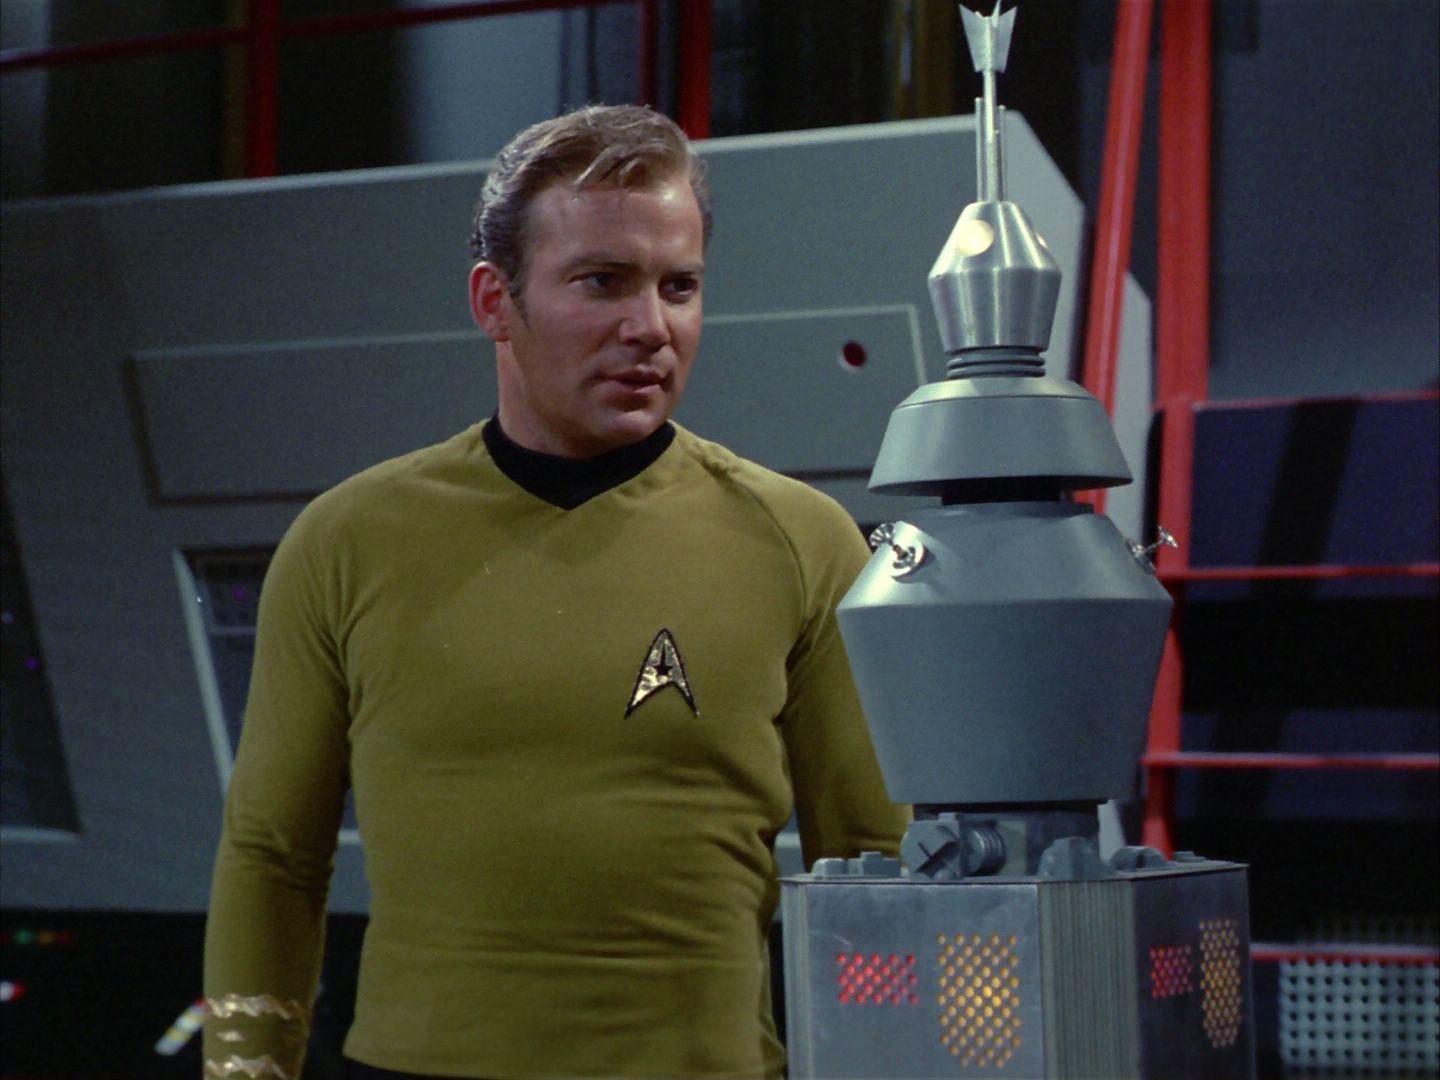 Captain Kirk from Star Trek the original series. He’s looking angrily at a computer, which is in the shape of a gray cylinder with a few lights, knobs, and antennae.